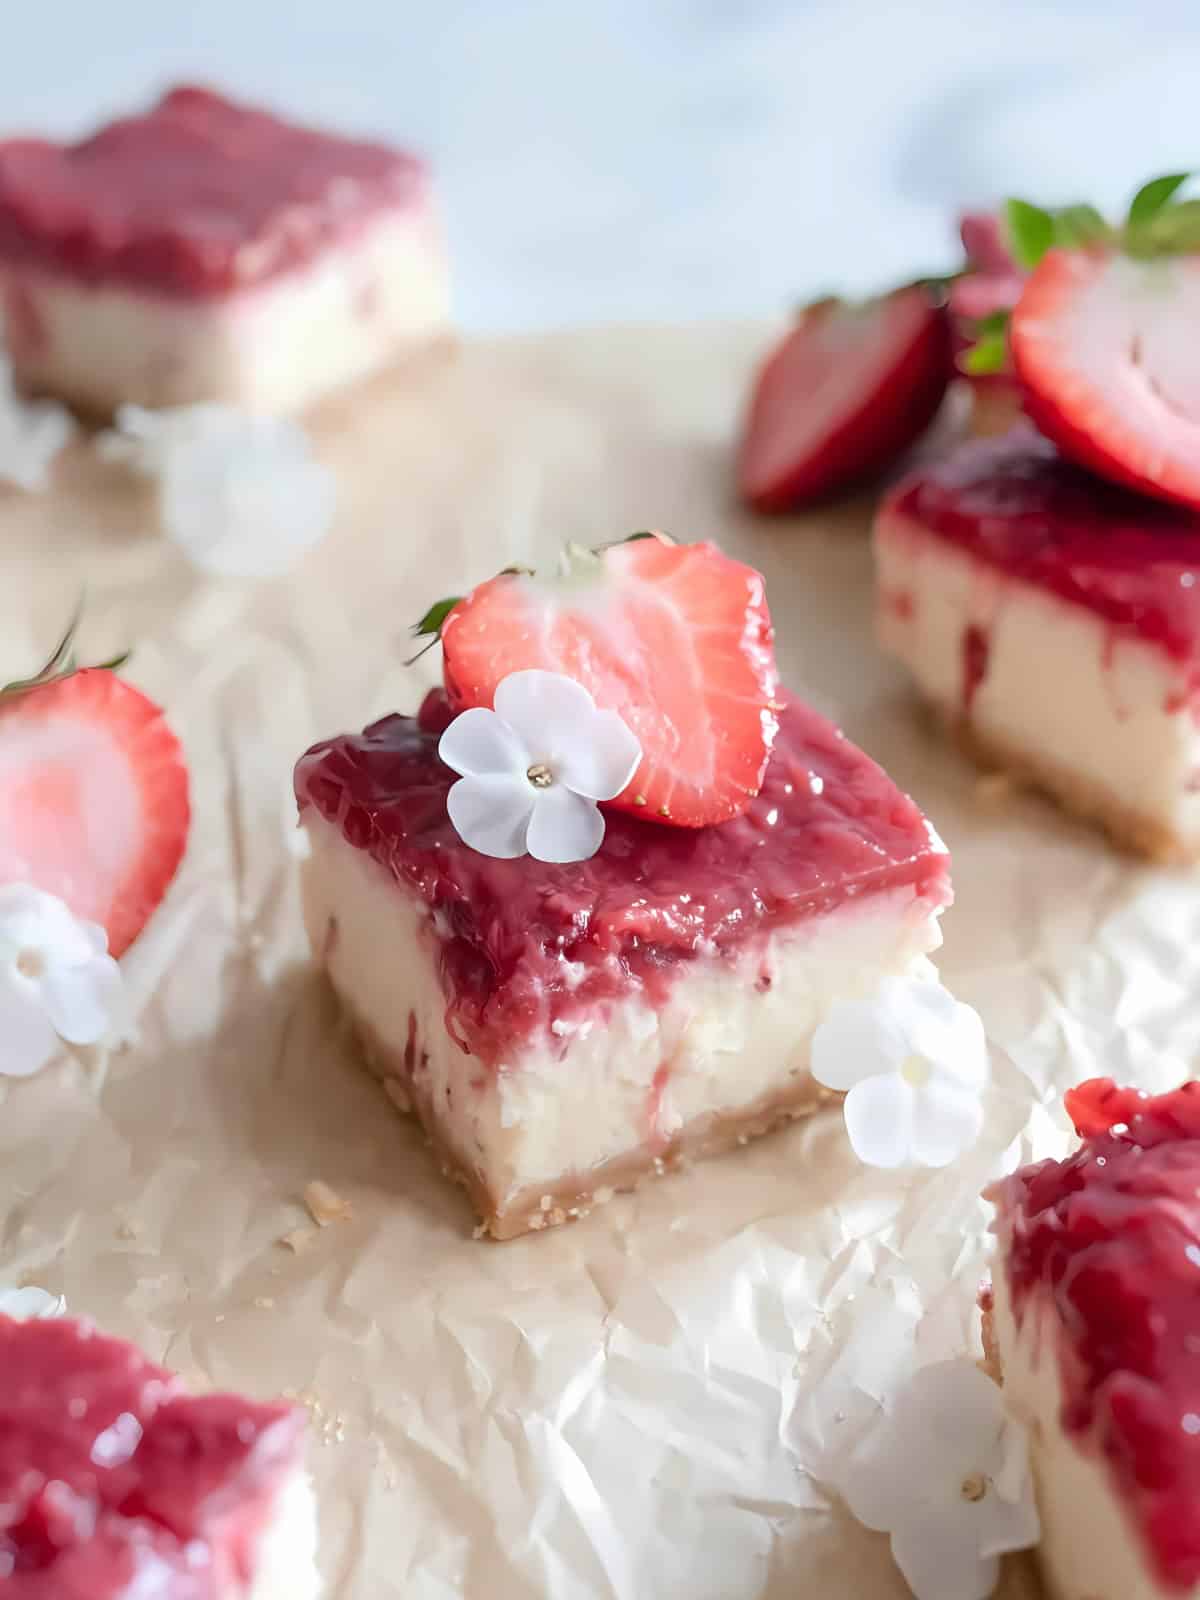 Cube size cutlets of Strawberry Cheesecake Bars with sliced strawberry on top.